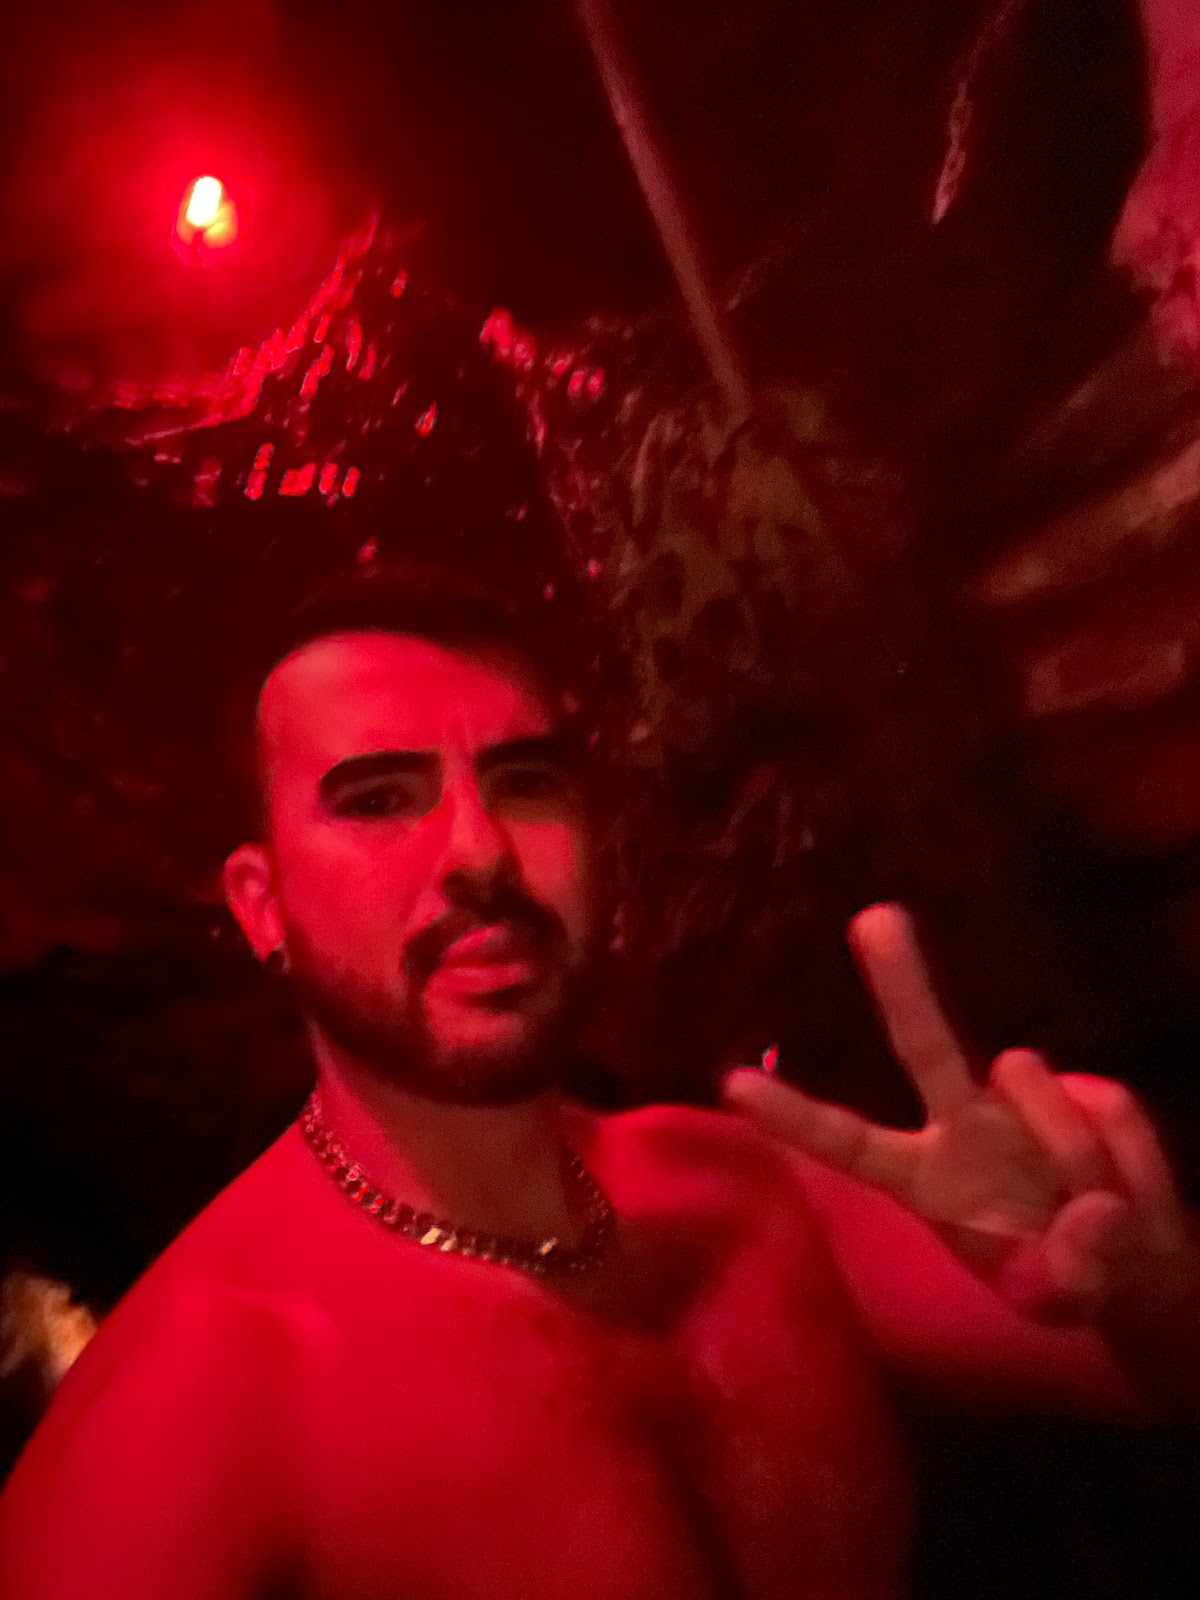 gay xxx content creator and influencer phil flashes a peace sign shirtless in L’impact’s dungeon gay cruising bar in paris